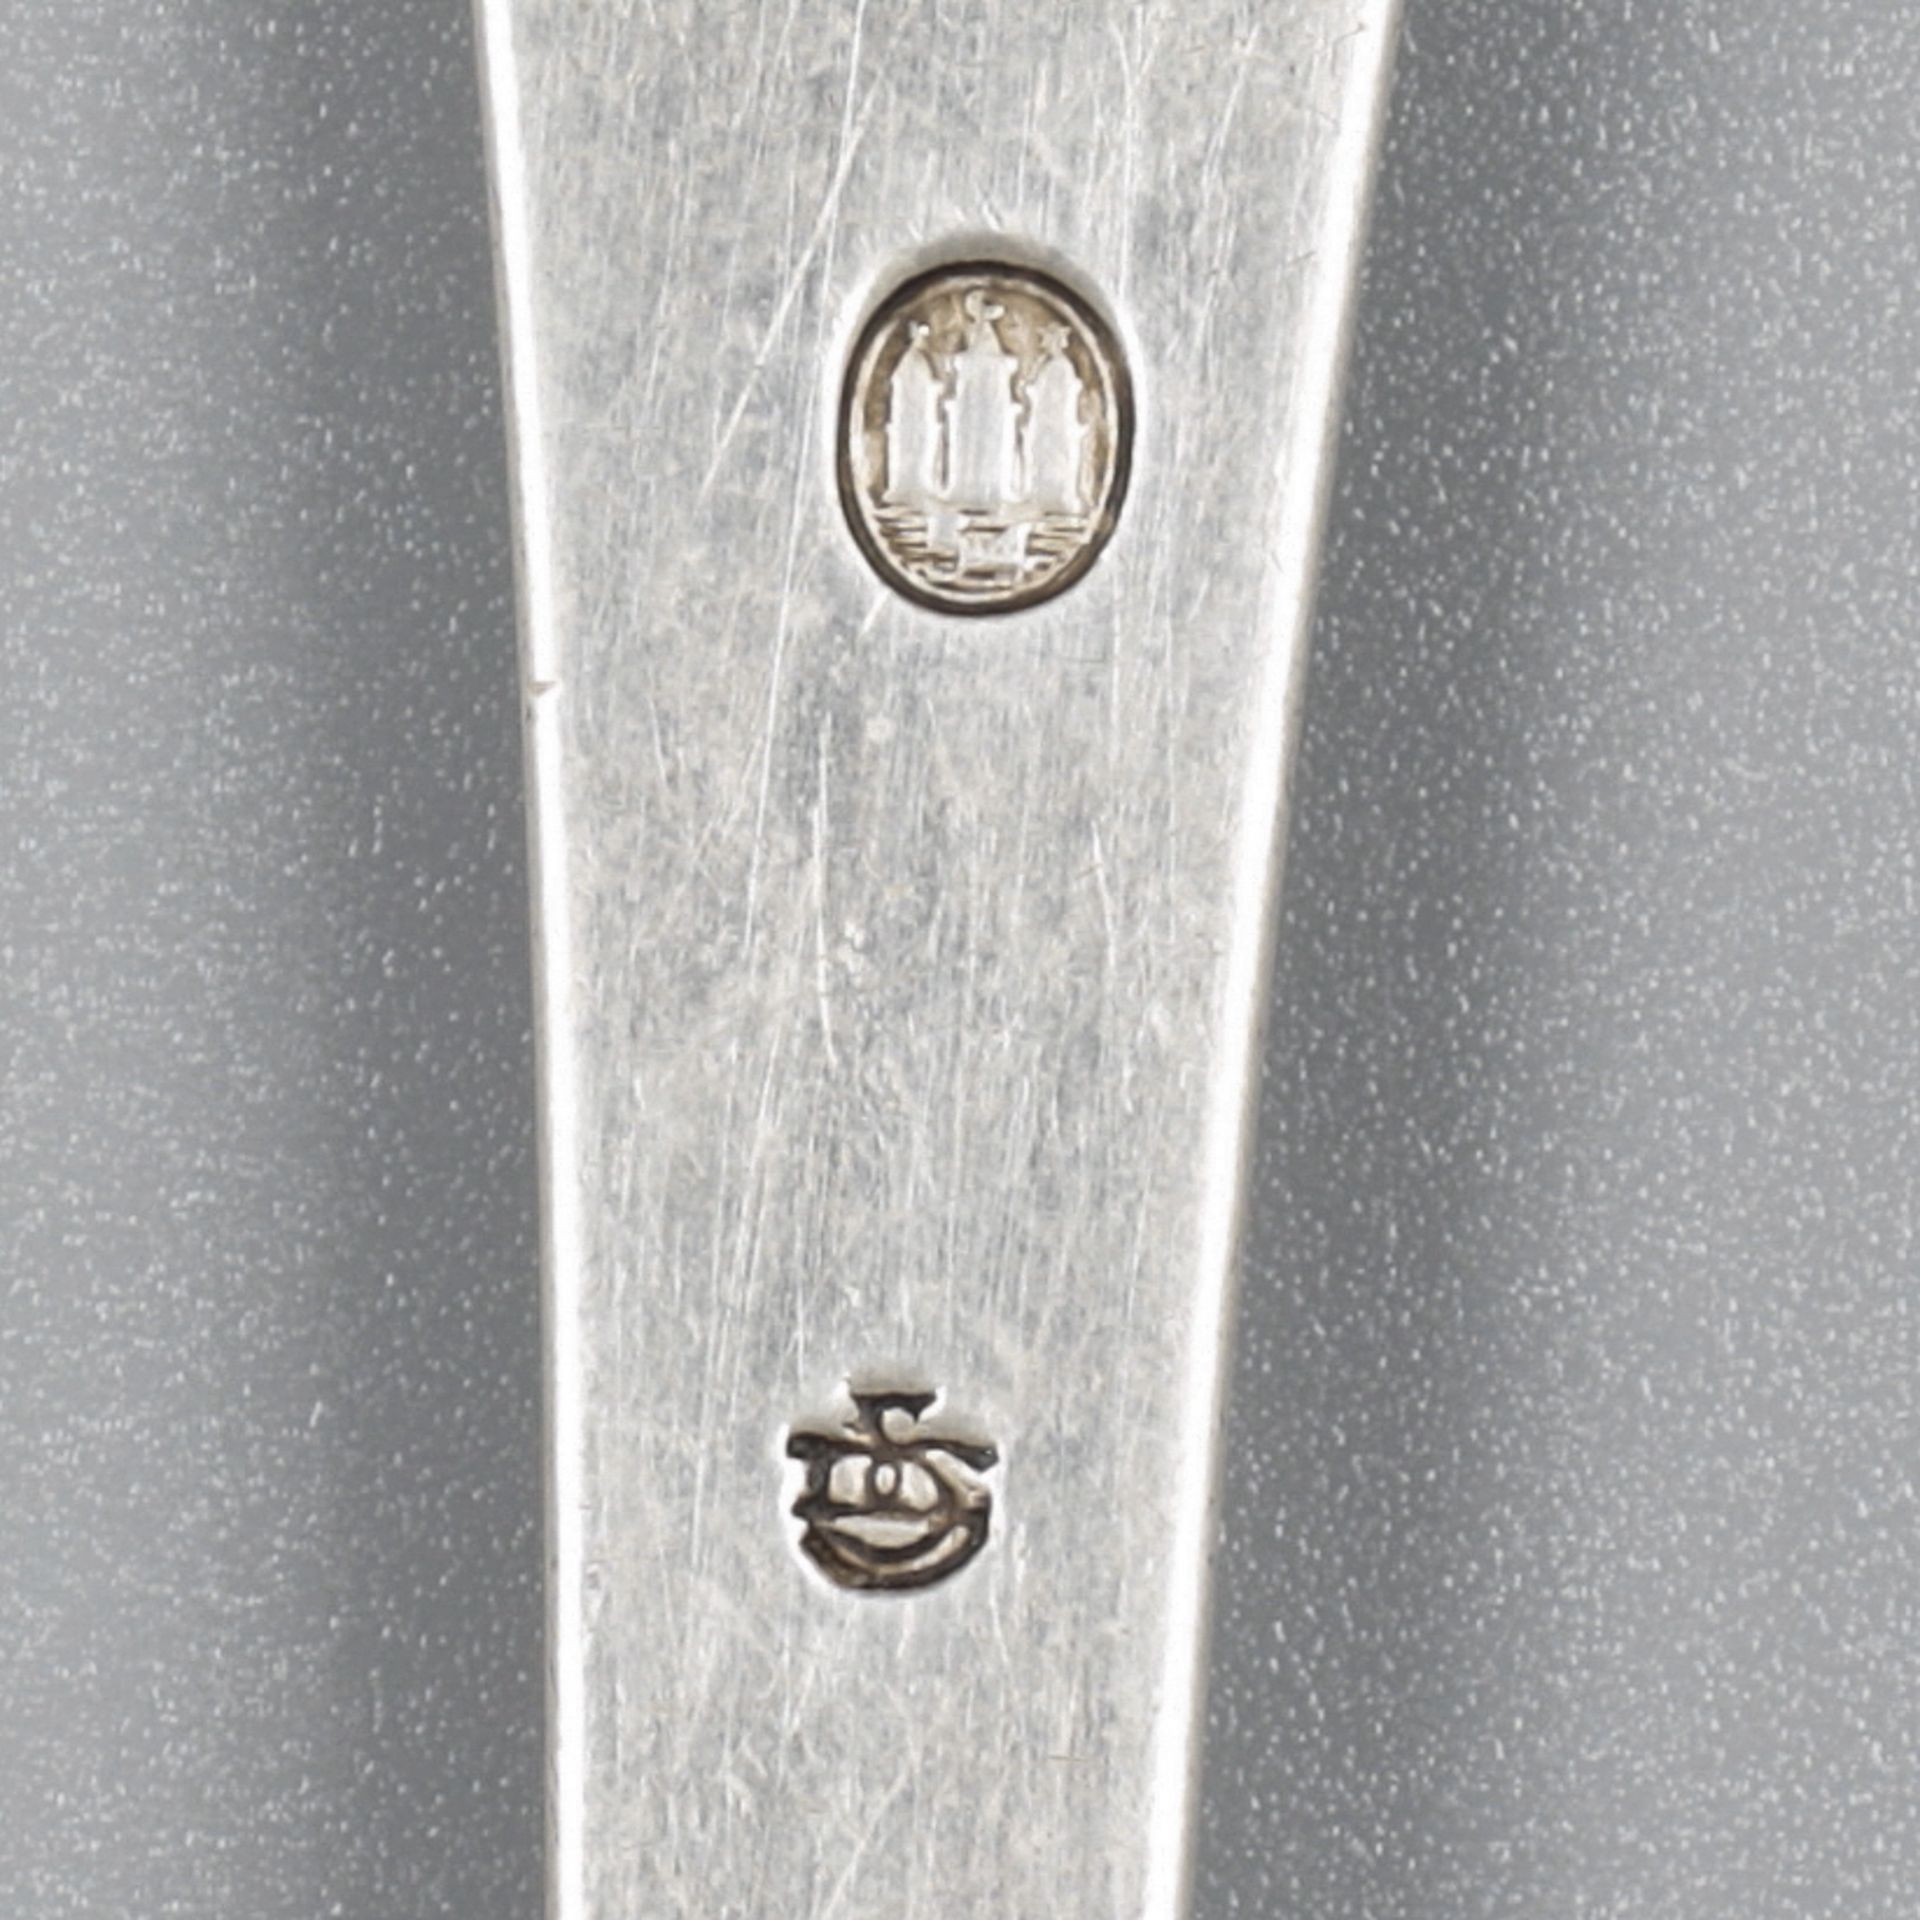 No reserve - Silver serving spoon. - Image 5 of 5